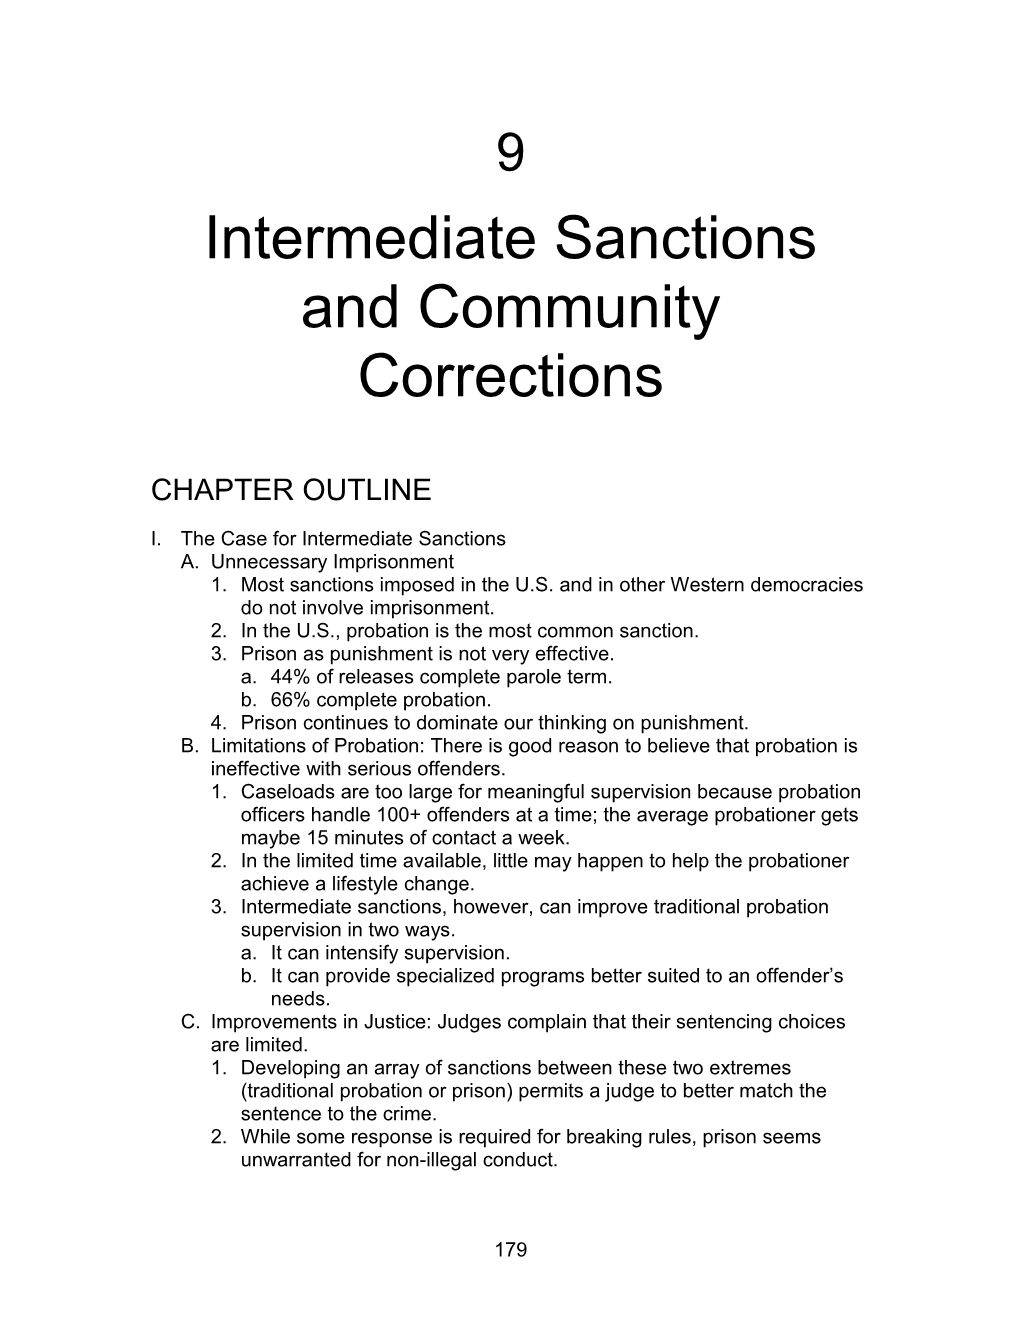 Intermediate Sanctions and Community Corrections